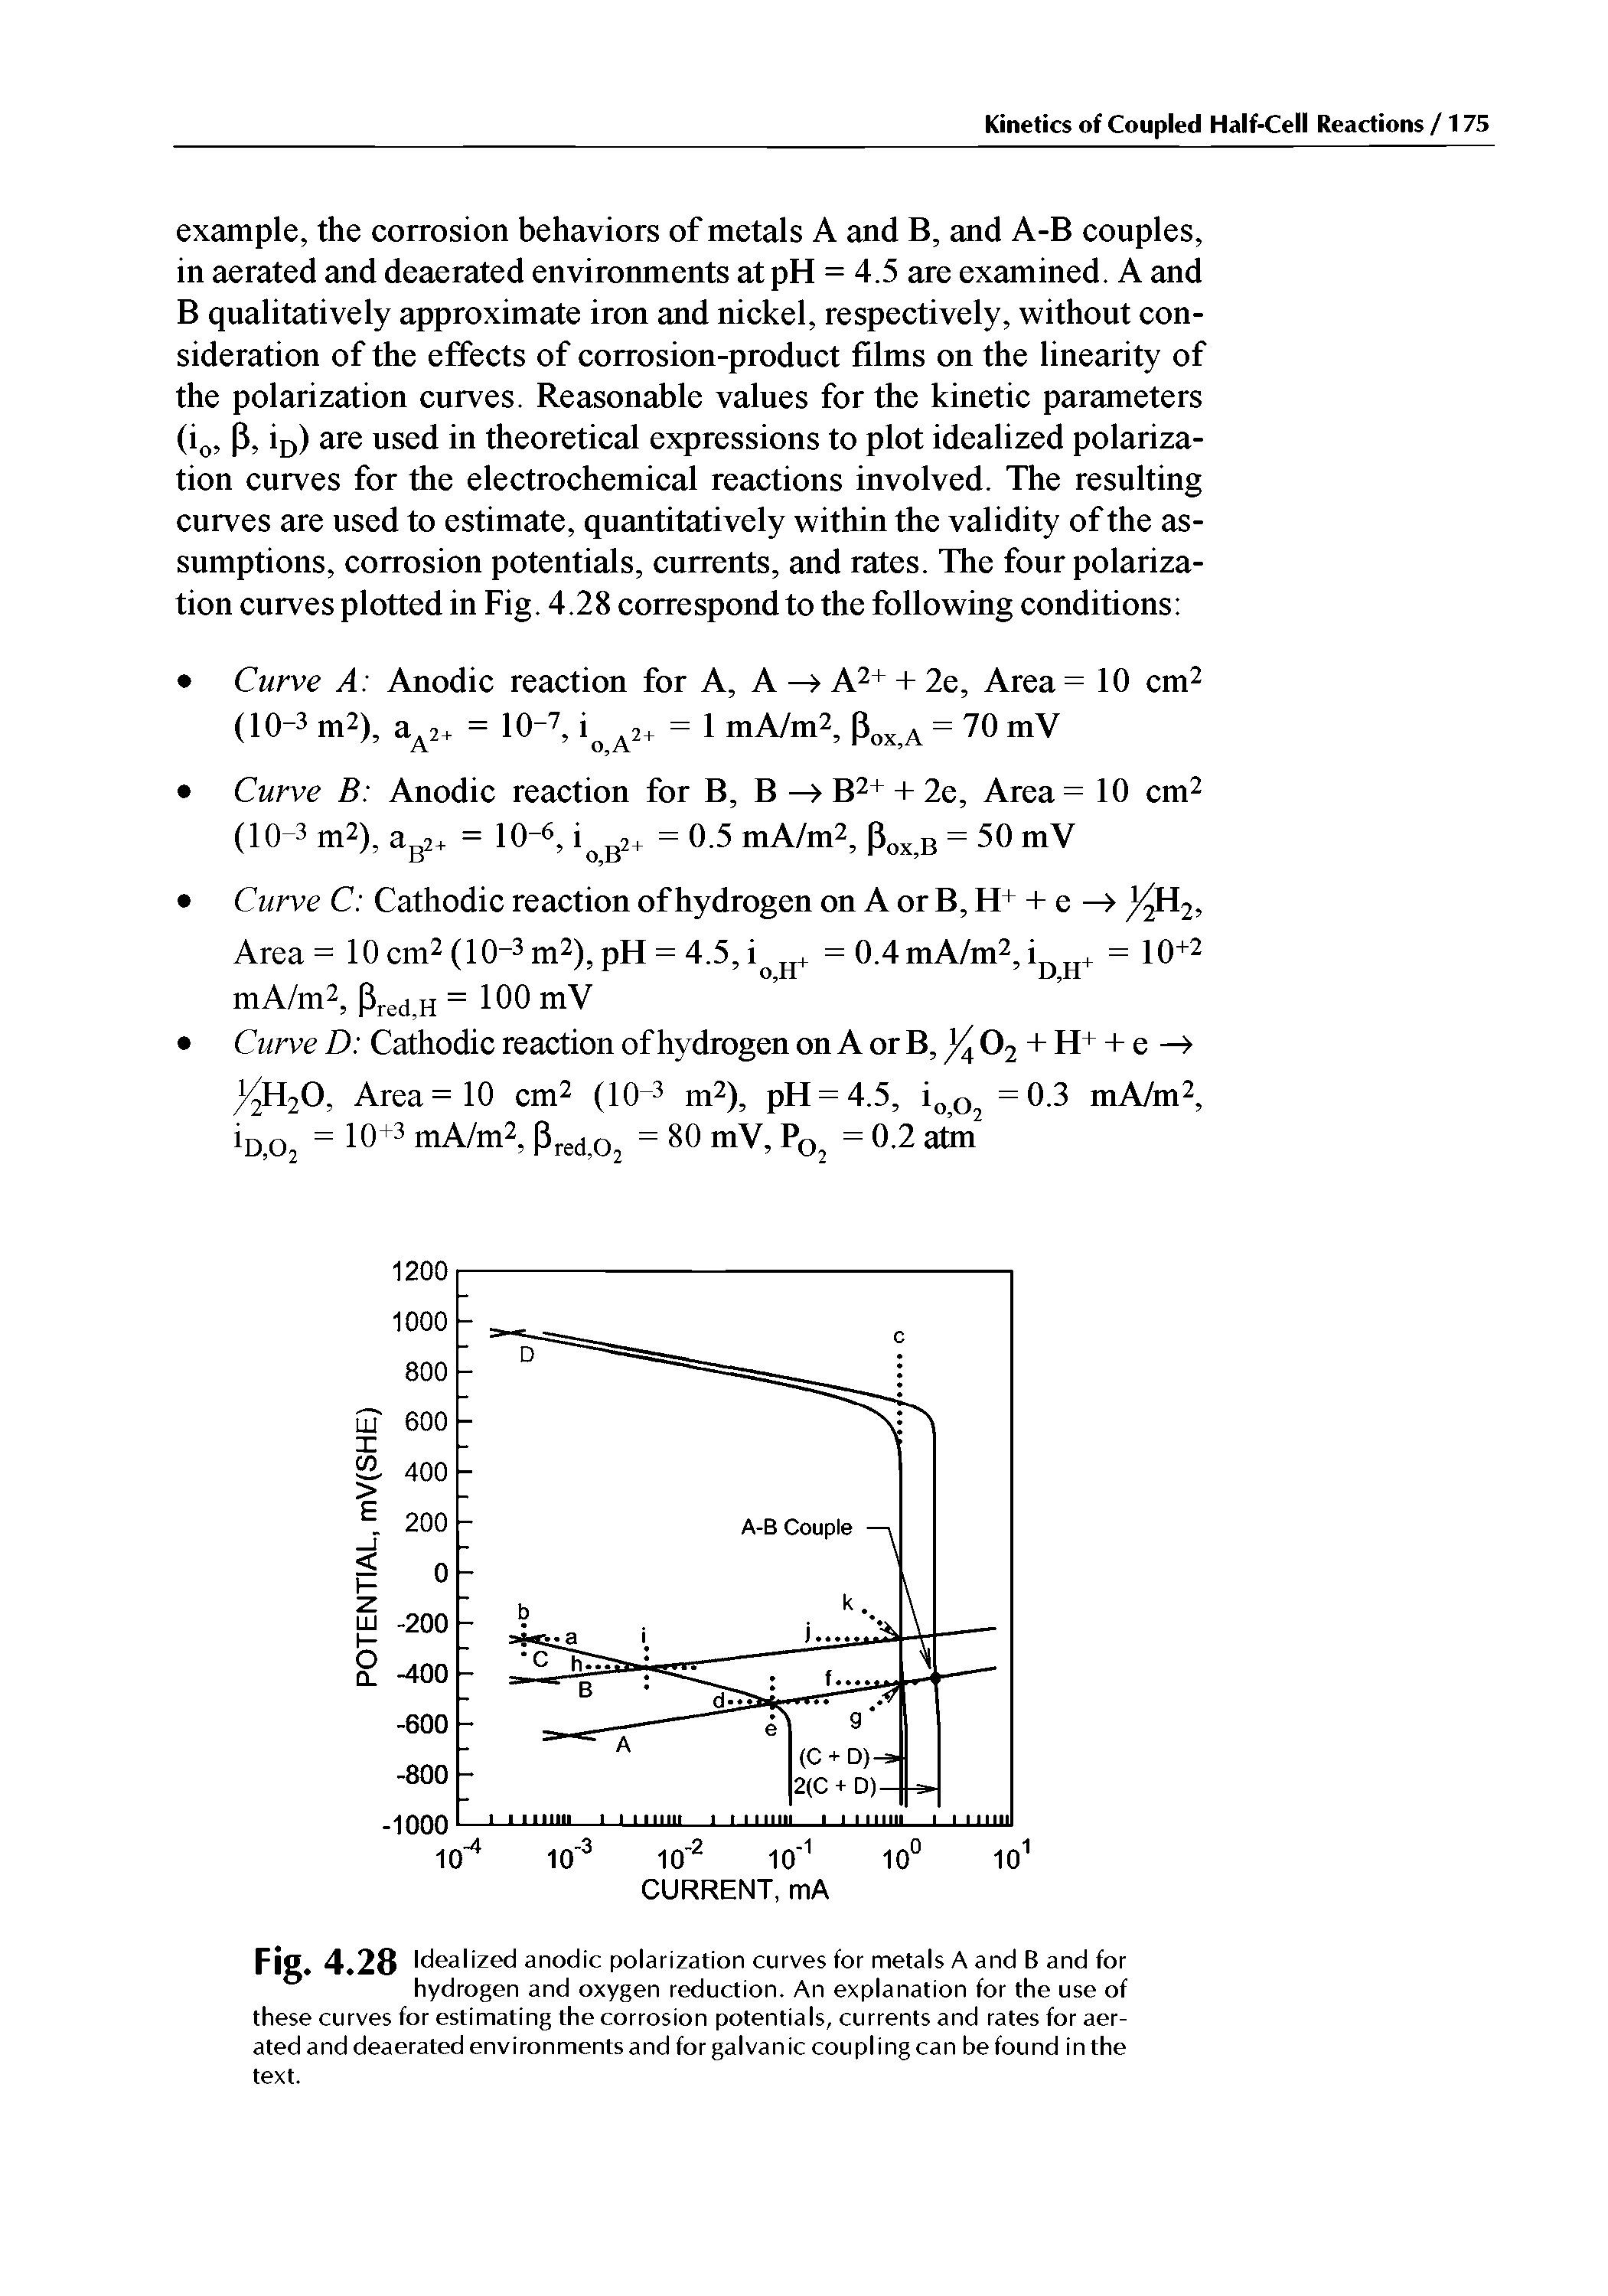 Fig. 4.28 Idealized anodic polarization curves for metals A and B and for hydrogen and oxygen reduction. An explanation for the use of these curves for estimating the corrosion potentials, currents and rates for aerated and deaerated environments and for galvanic coupling can be found in the text.